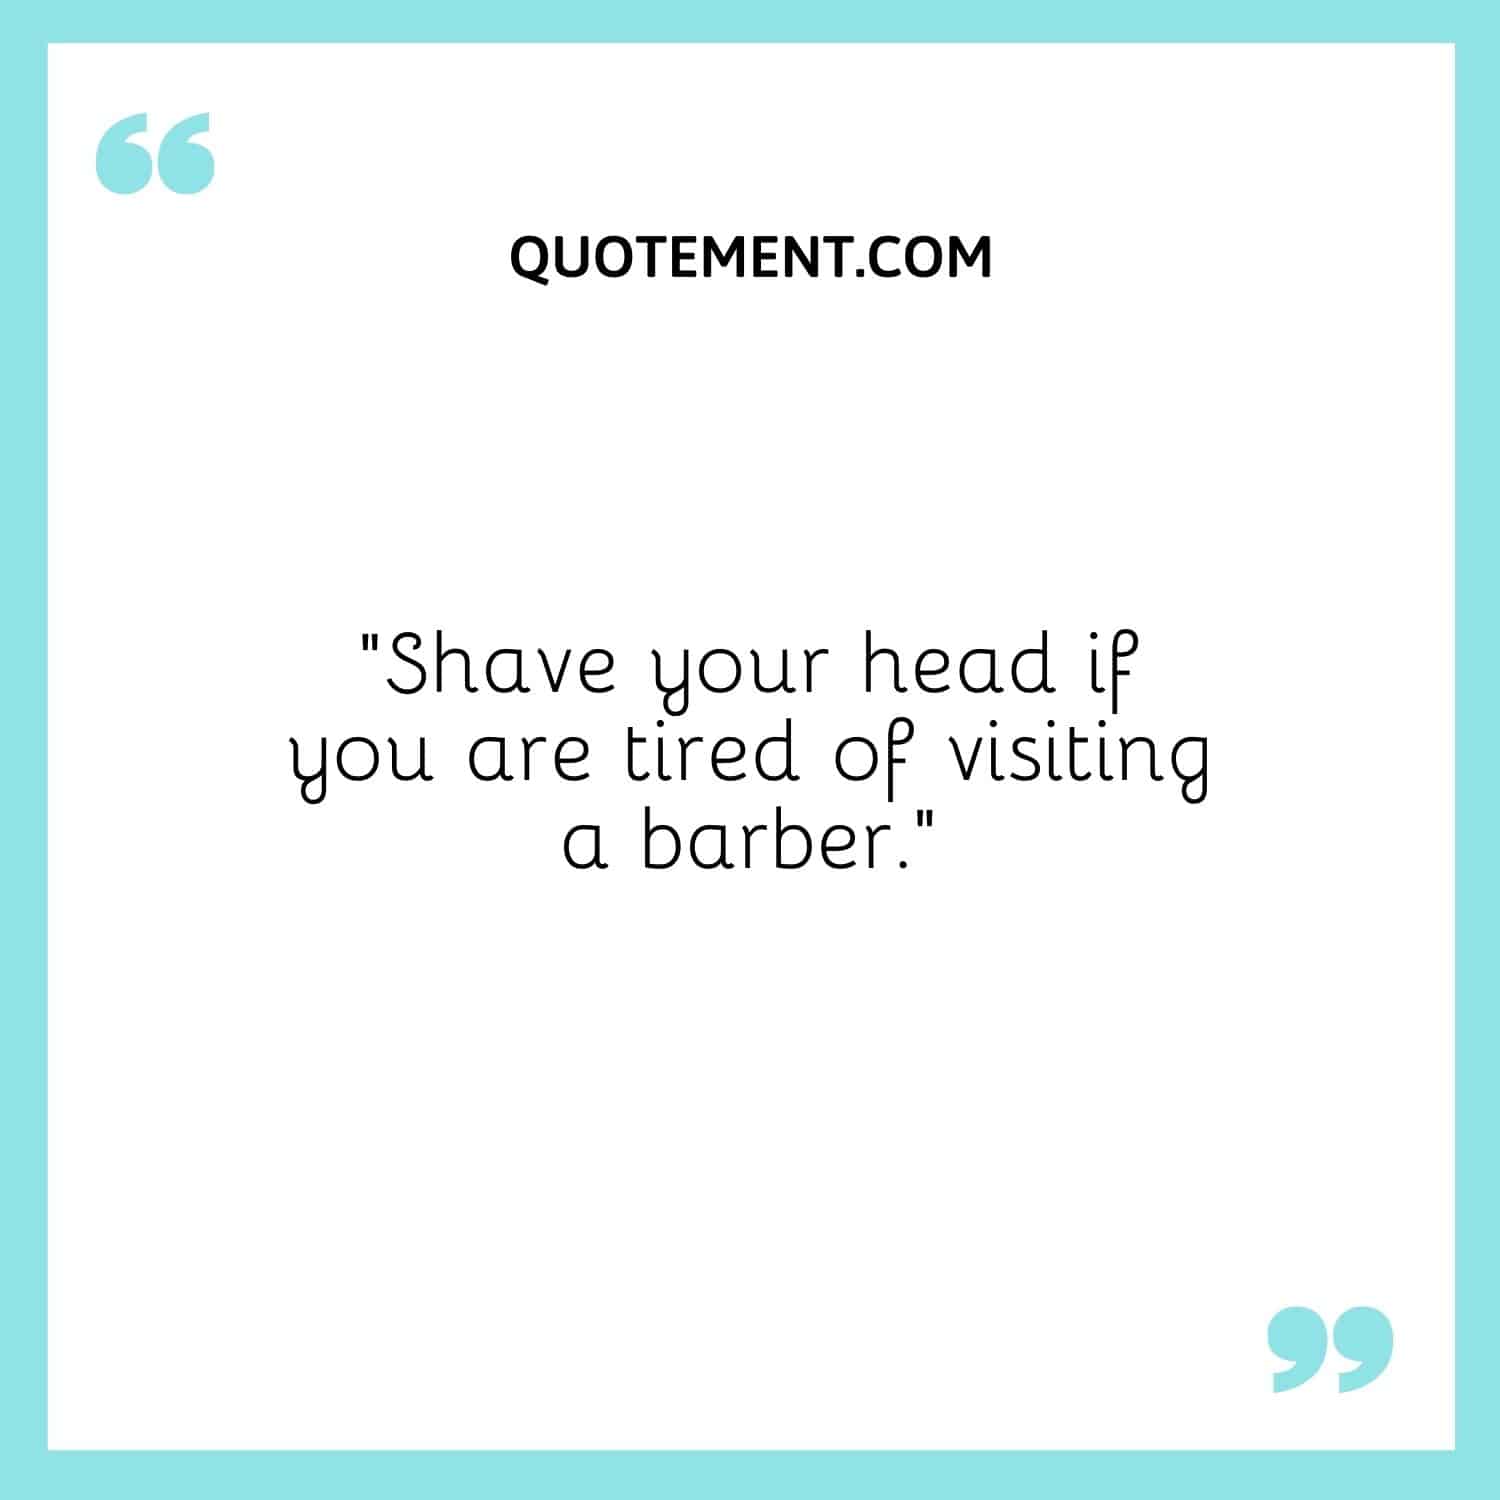 Shave your head if you are tired of visiting a barber.